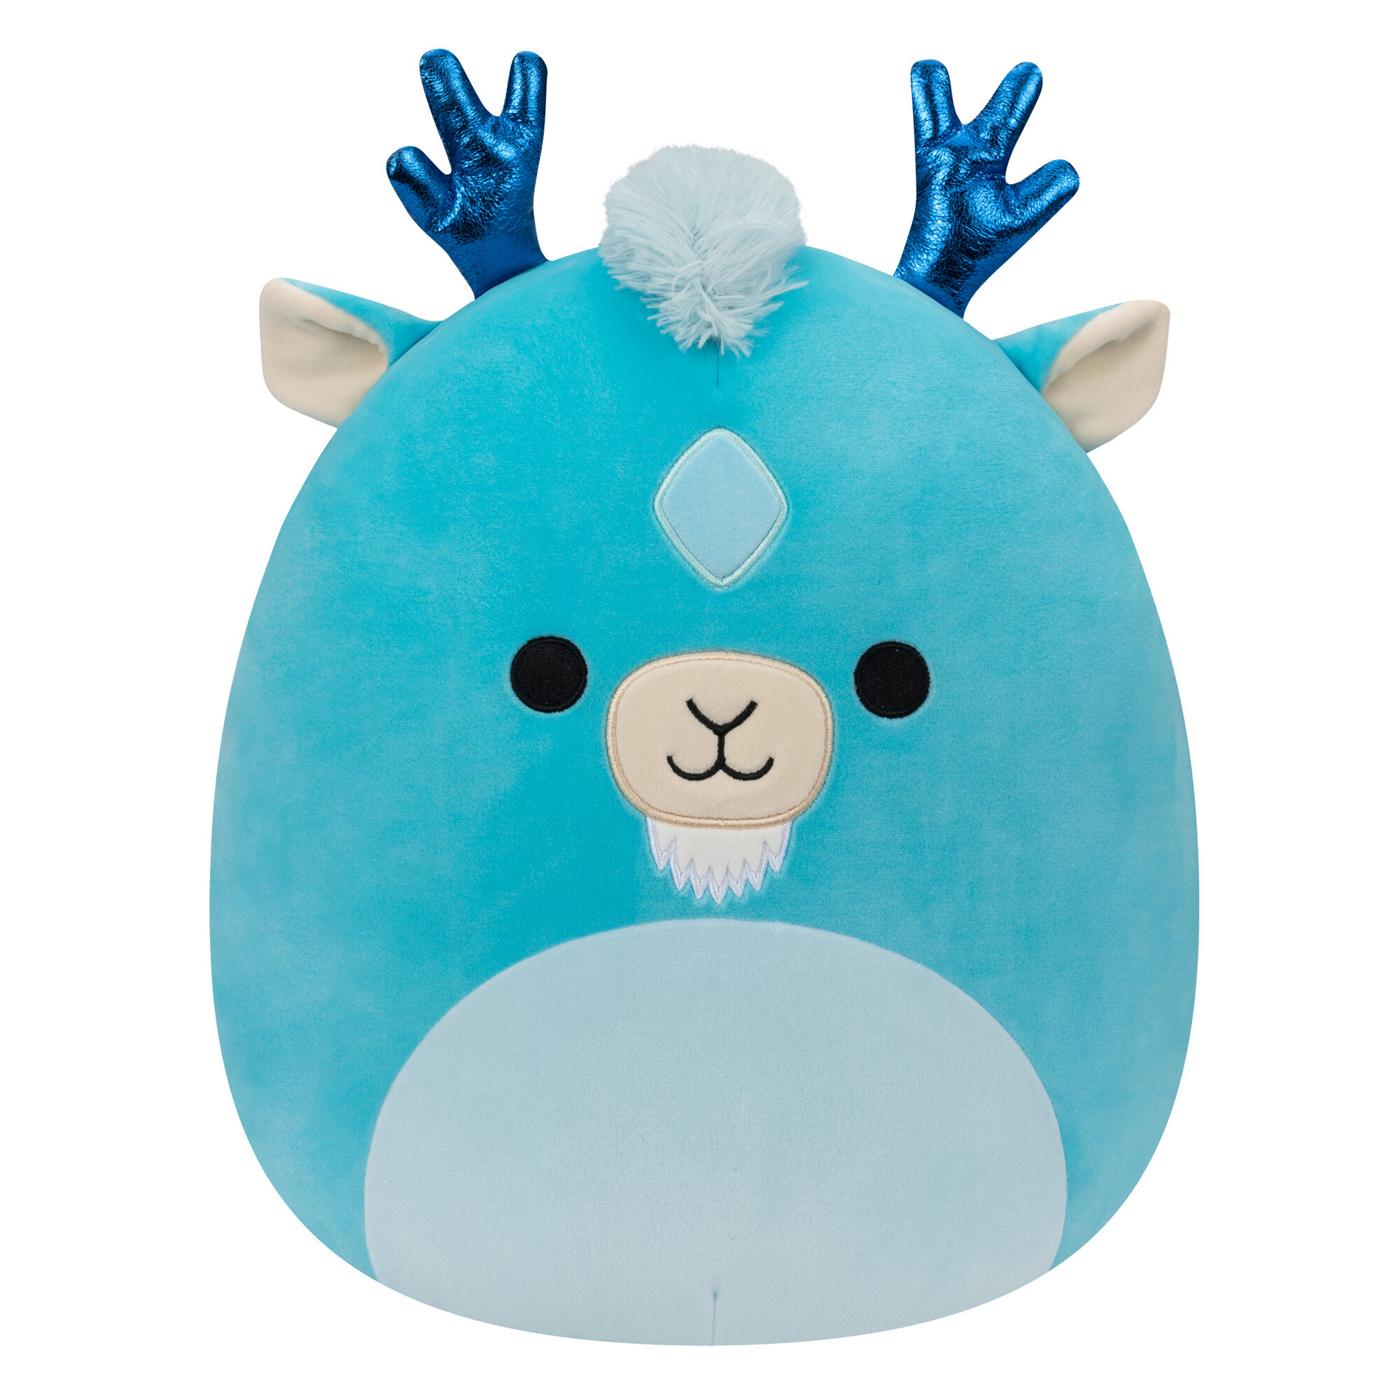 Squishmallows Reindeer Plush - Blue; image 1 of 3